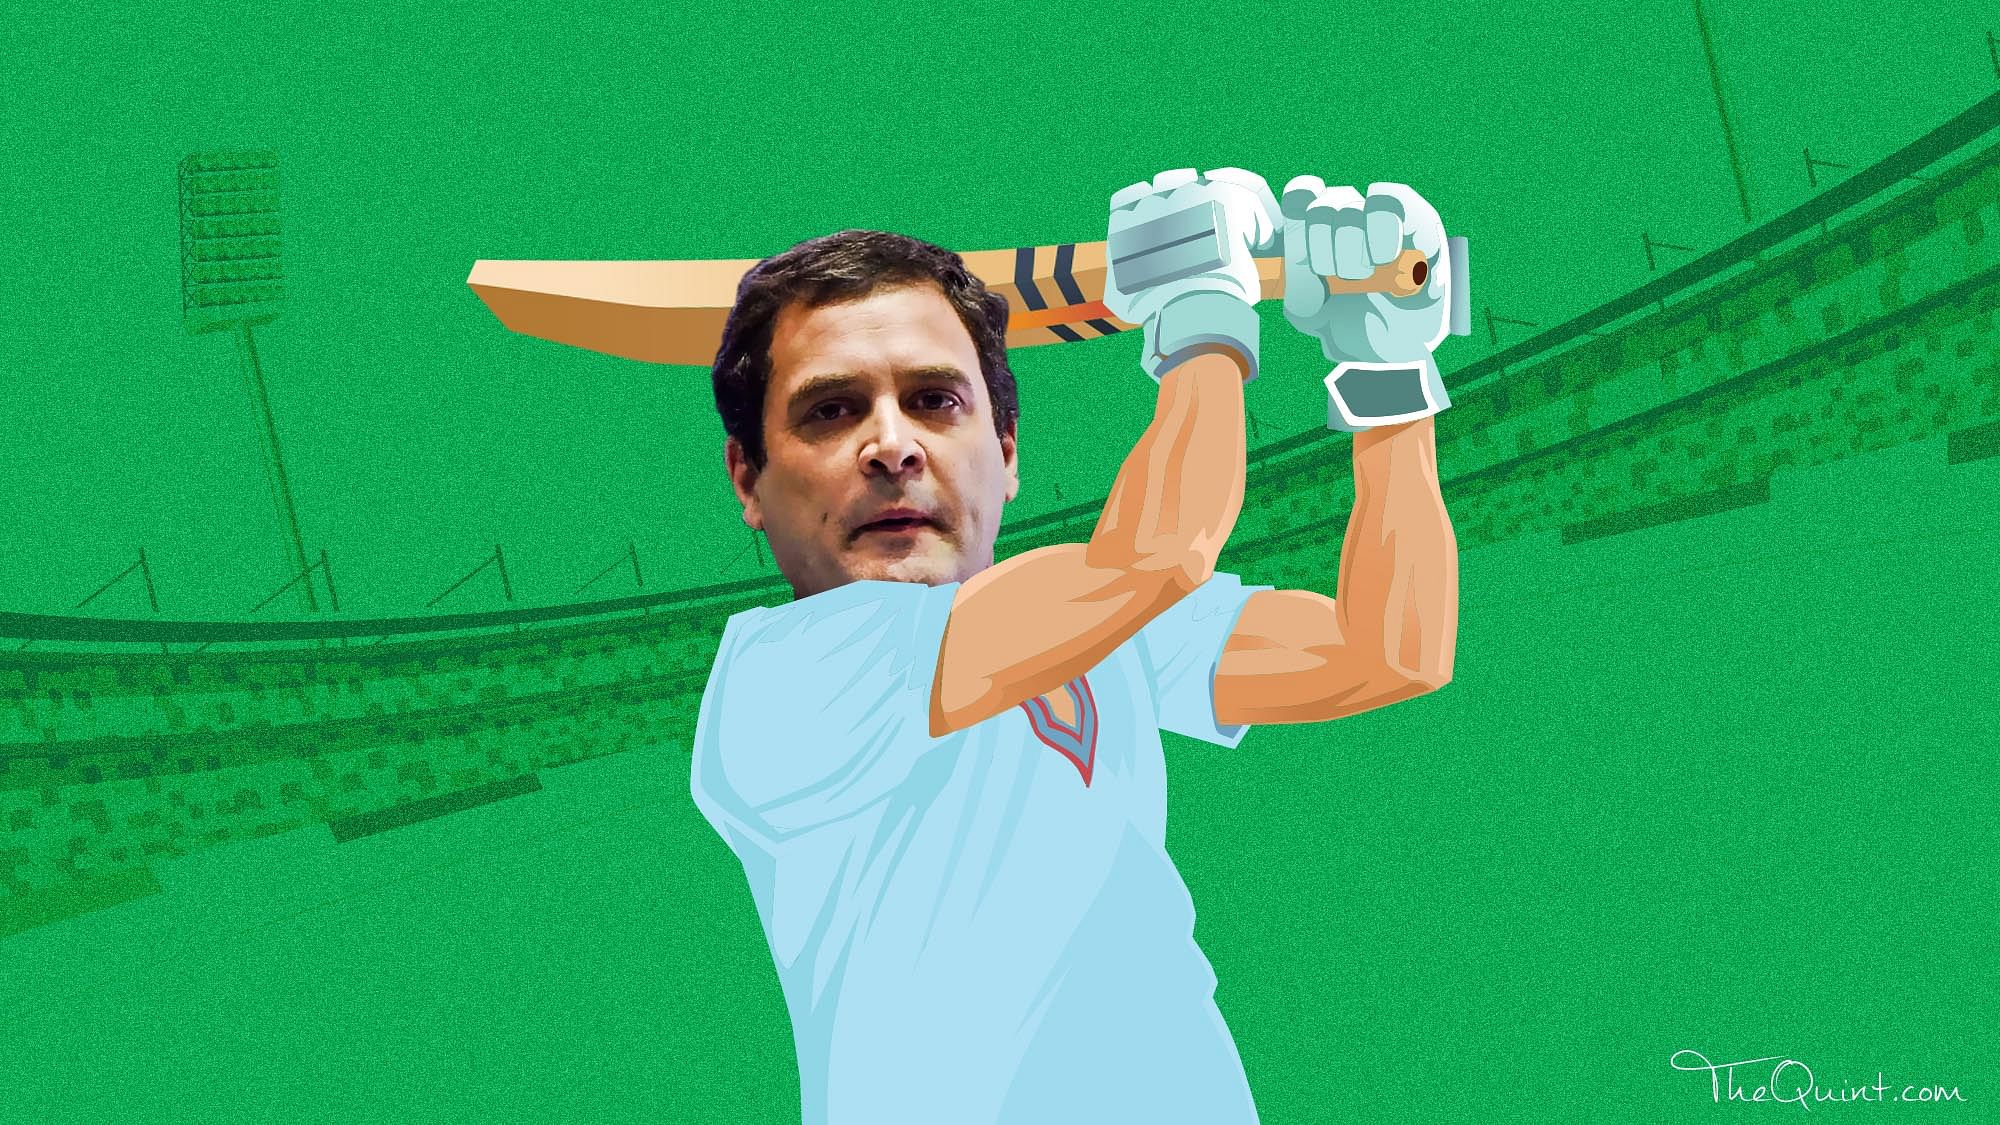 

Inducting new talent and overseeing the party from a vantage point can help Rahul Gandhi revamp the Congress.